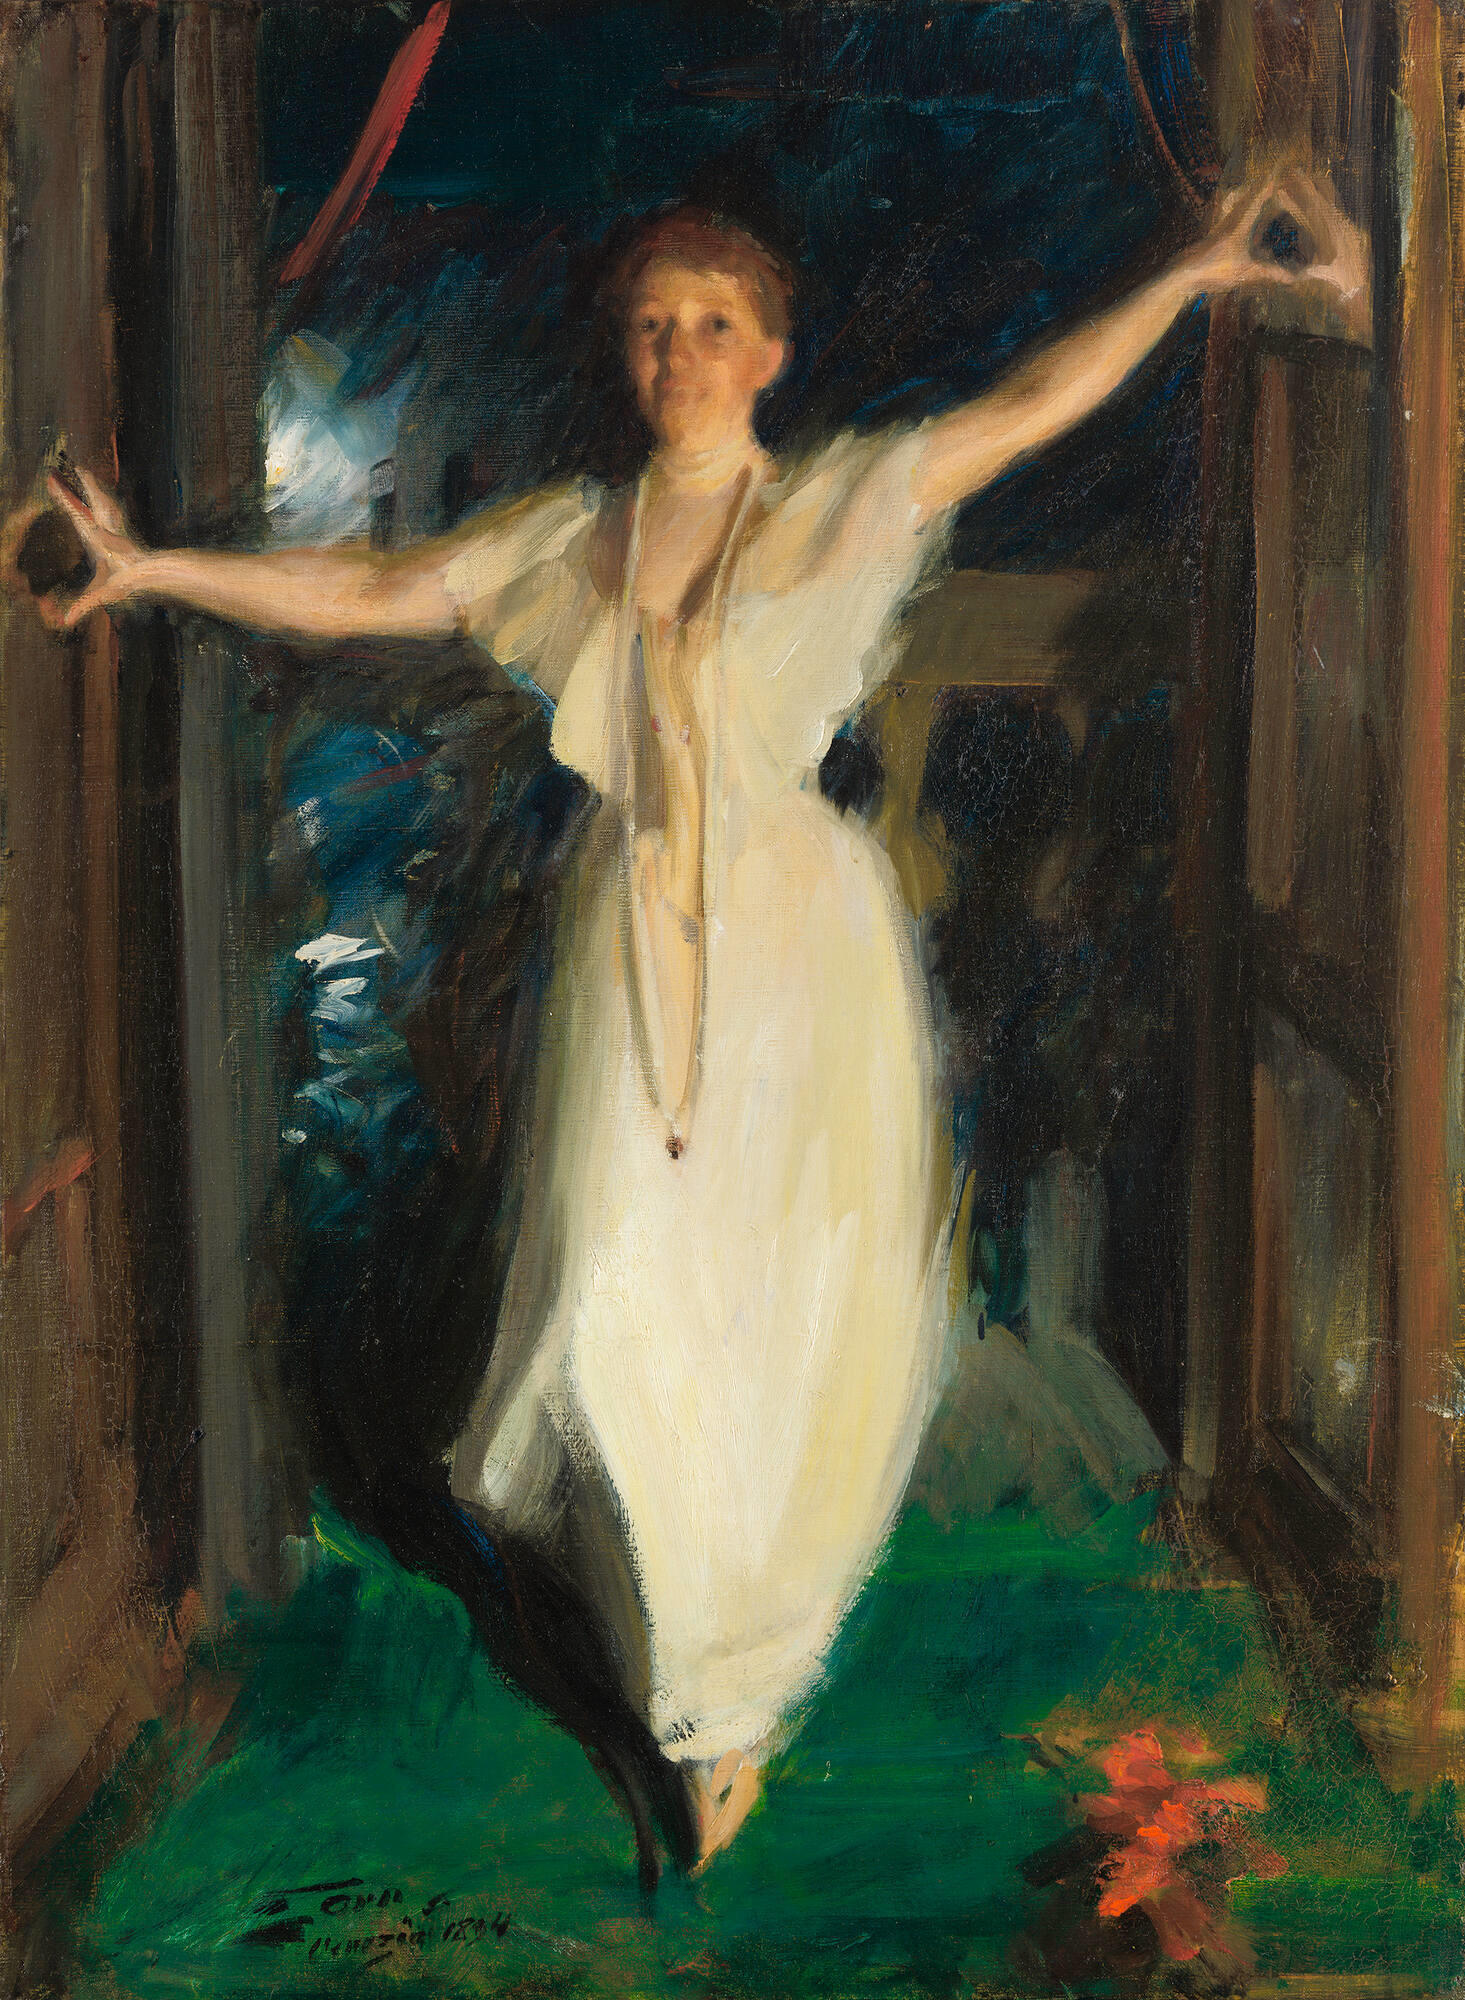 A woman, Isabella Stewart Gardner, with light skin and brown hair, steps forward with her arms outstretched. She wears a white dress and a long strand of pearls with a ruby.